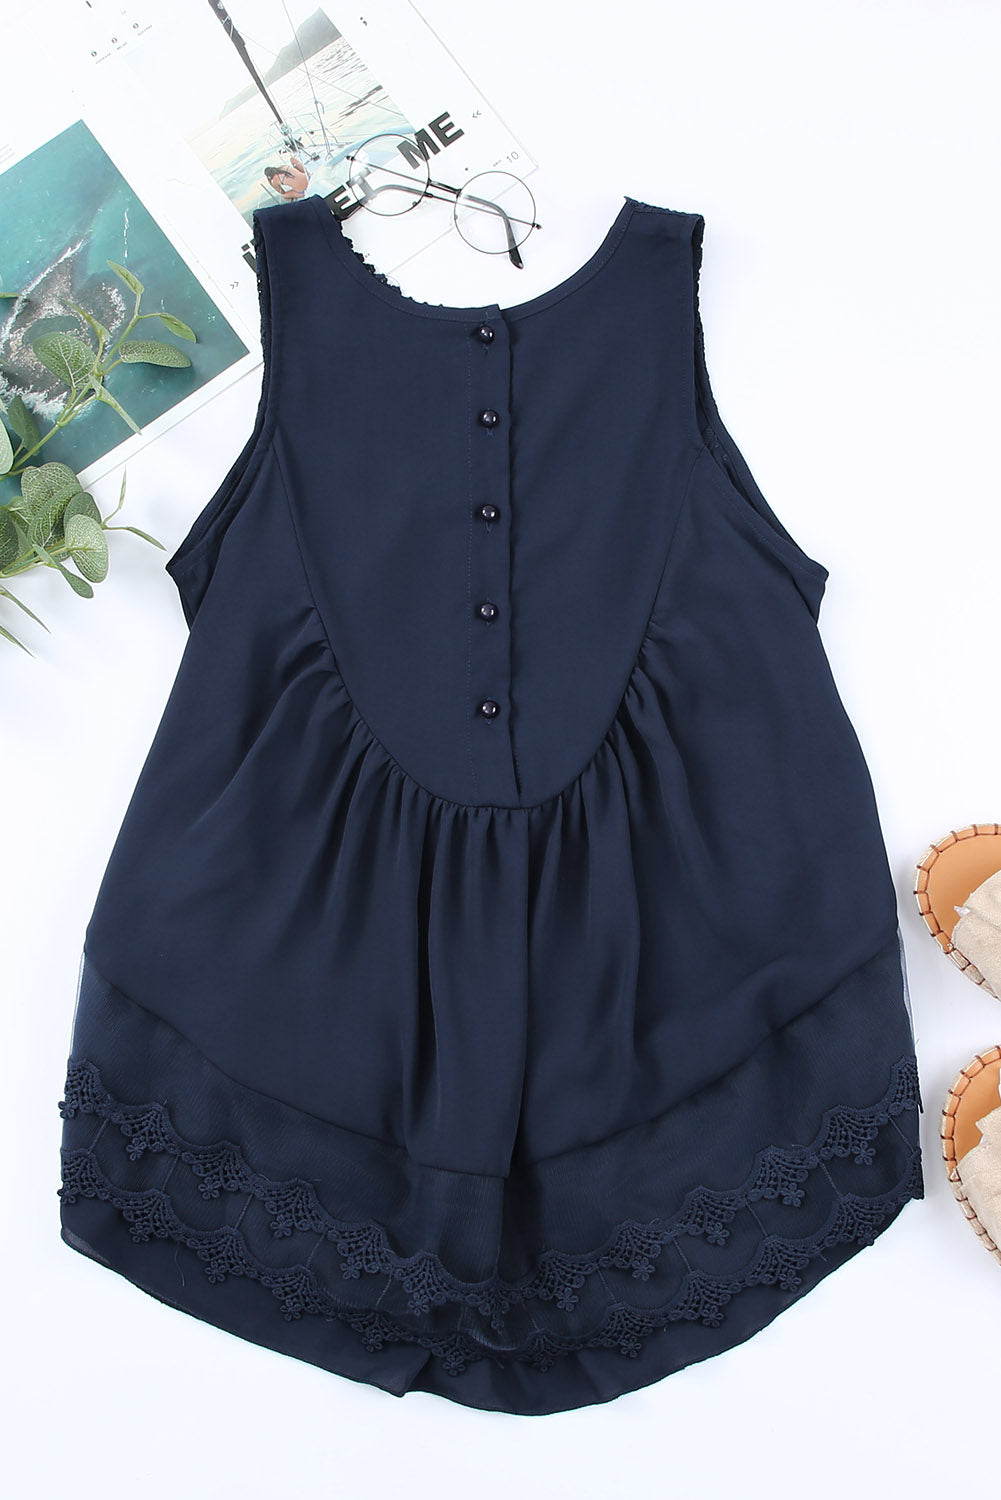 Navy Blue Lace Detail Buttons Back Sleeveless Top